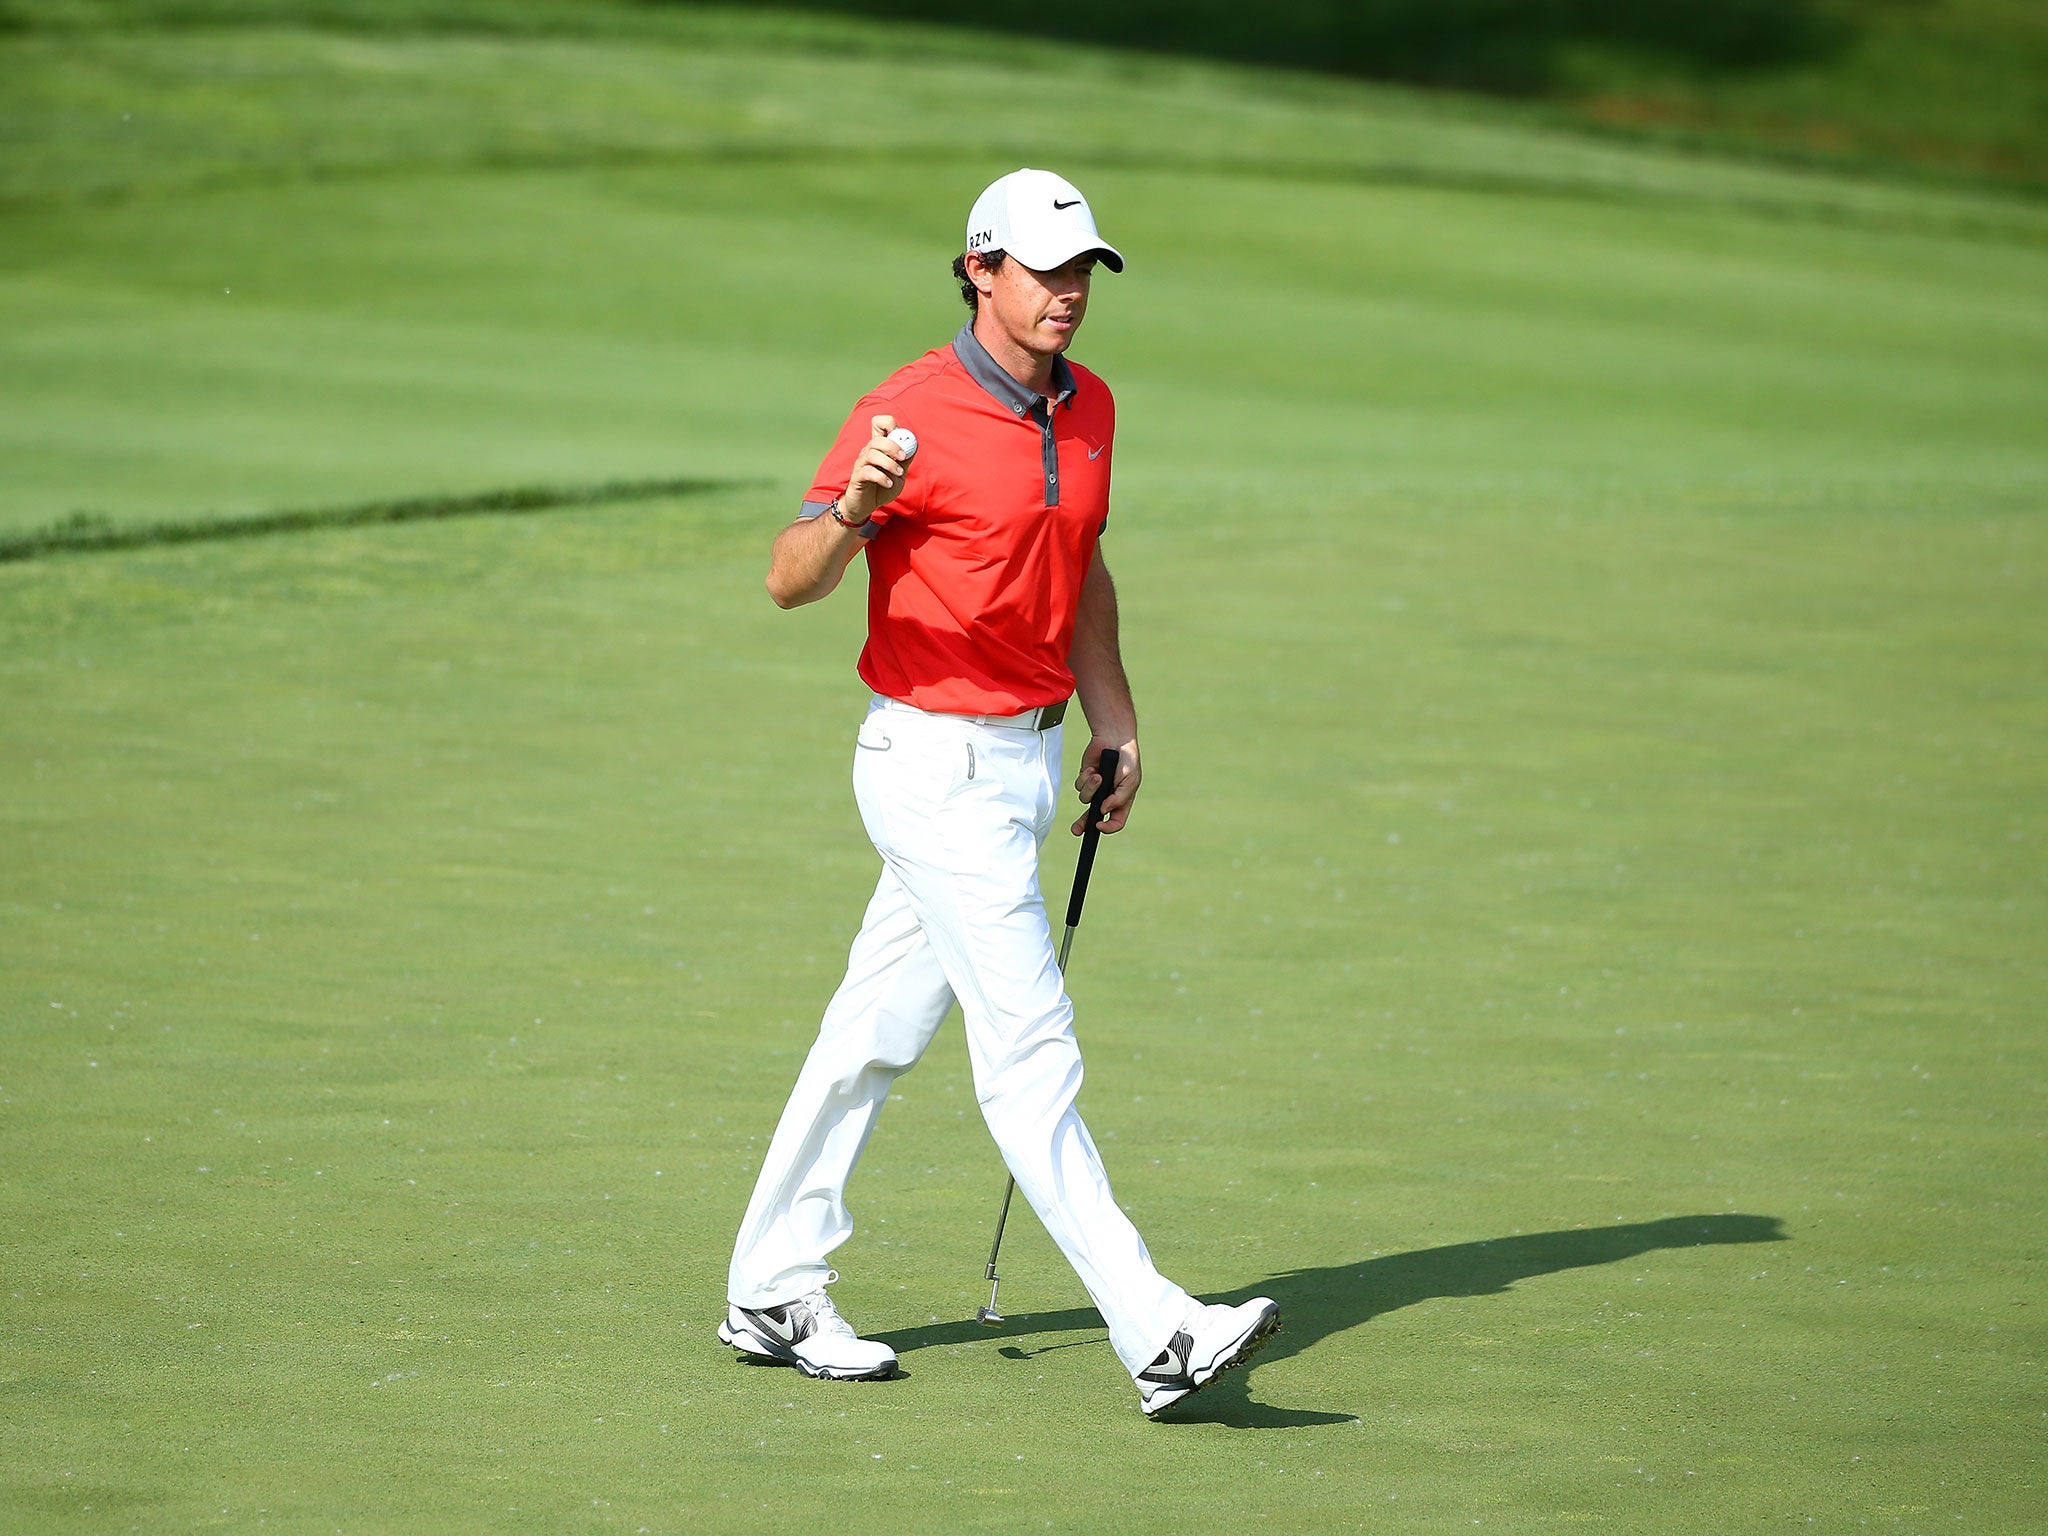 Rory McIlroy leads the field after the opening round of the Jack Nicklaus Memorial Tournament in Ohio